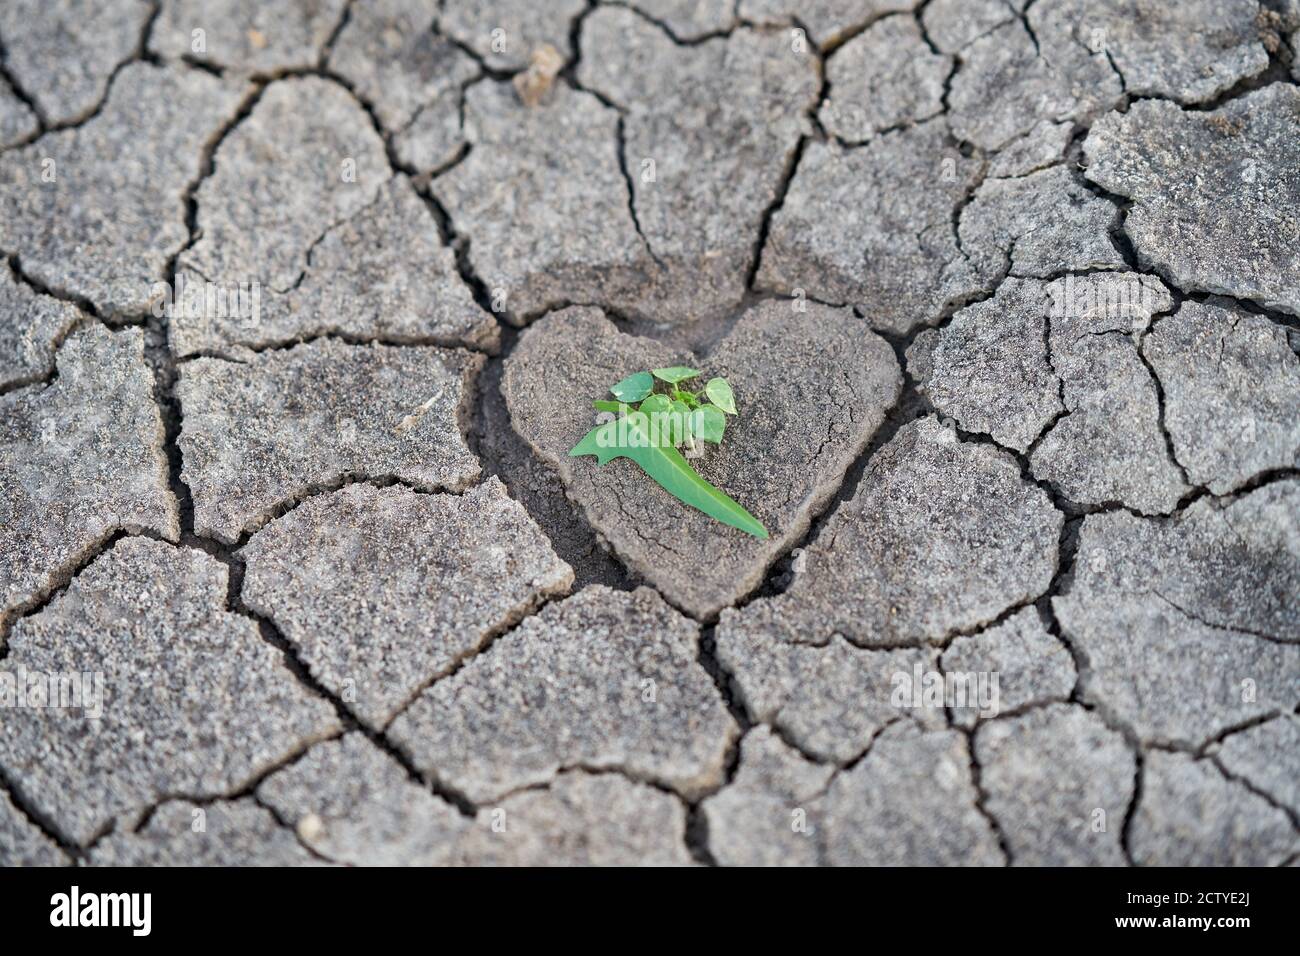 Dry parched earth, with a heart shaped center with some green plant. Stock Photo